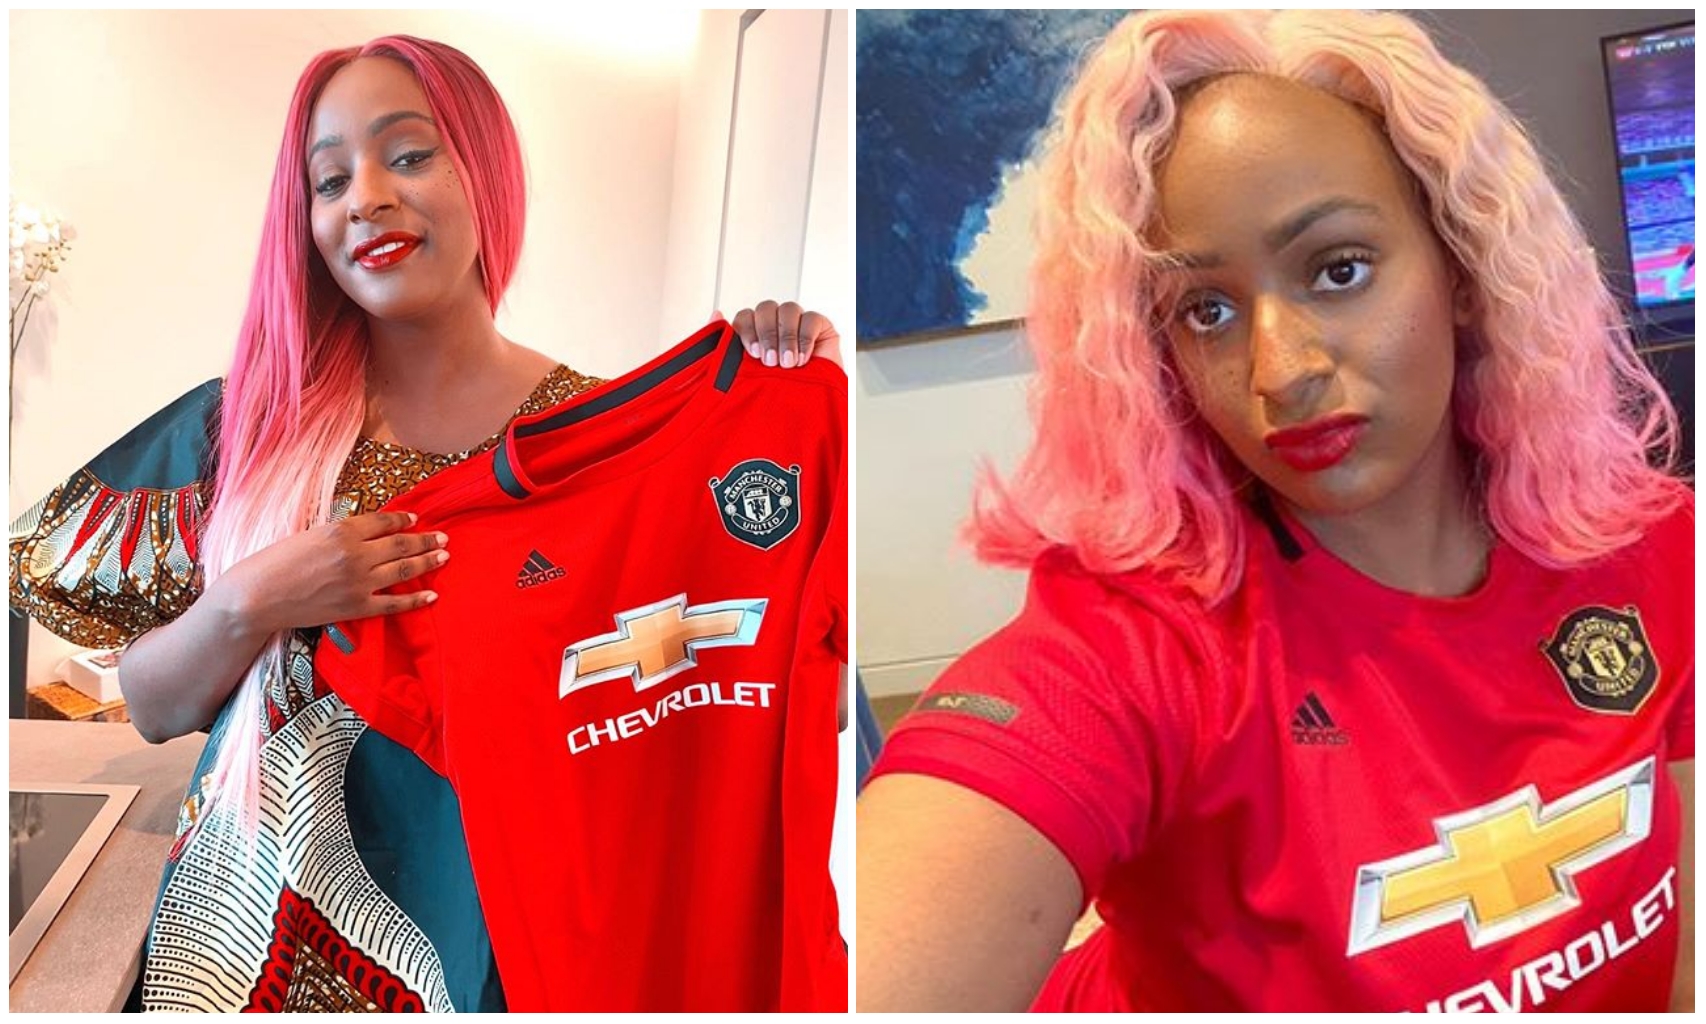 Joining Man Utd is the best choice I made in 2020 – DJ Cuppy shades Arsenal fans